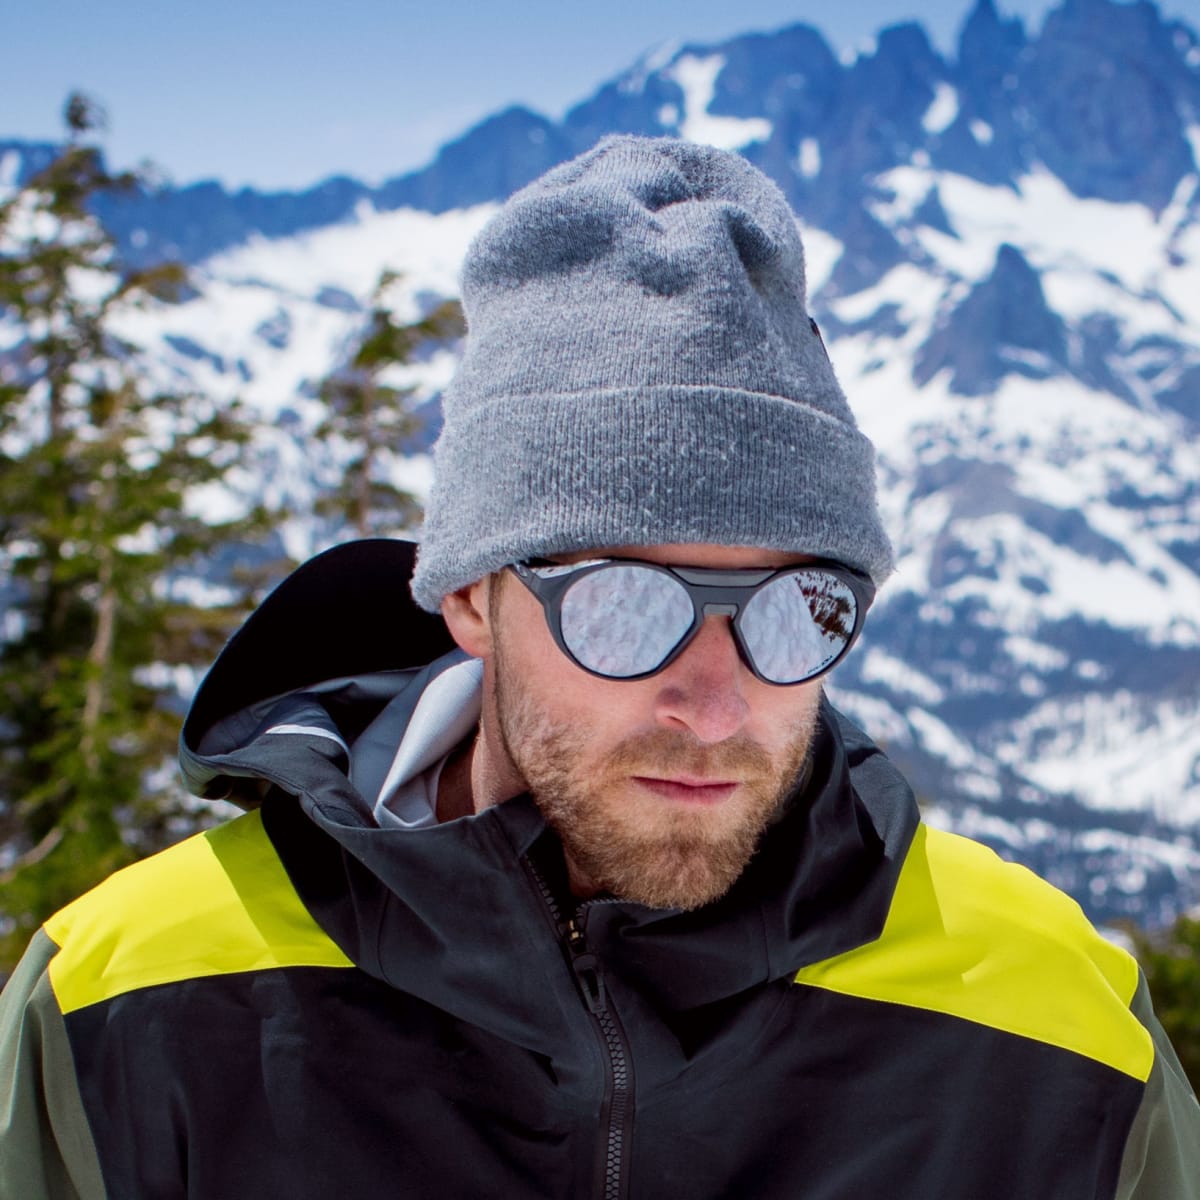 Clifden mountaineering sunglass - Acquire